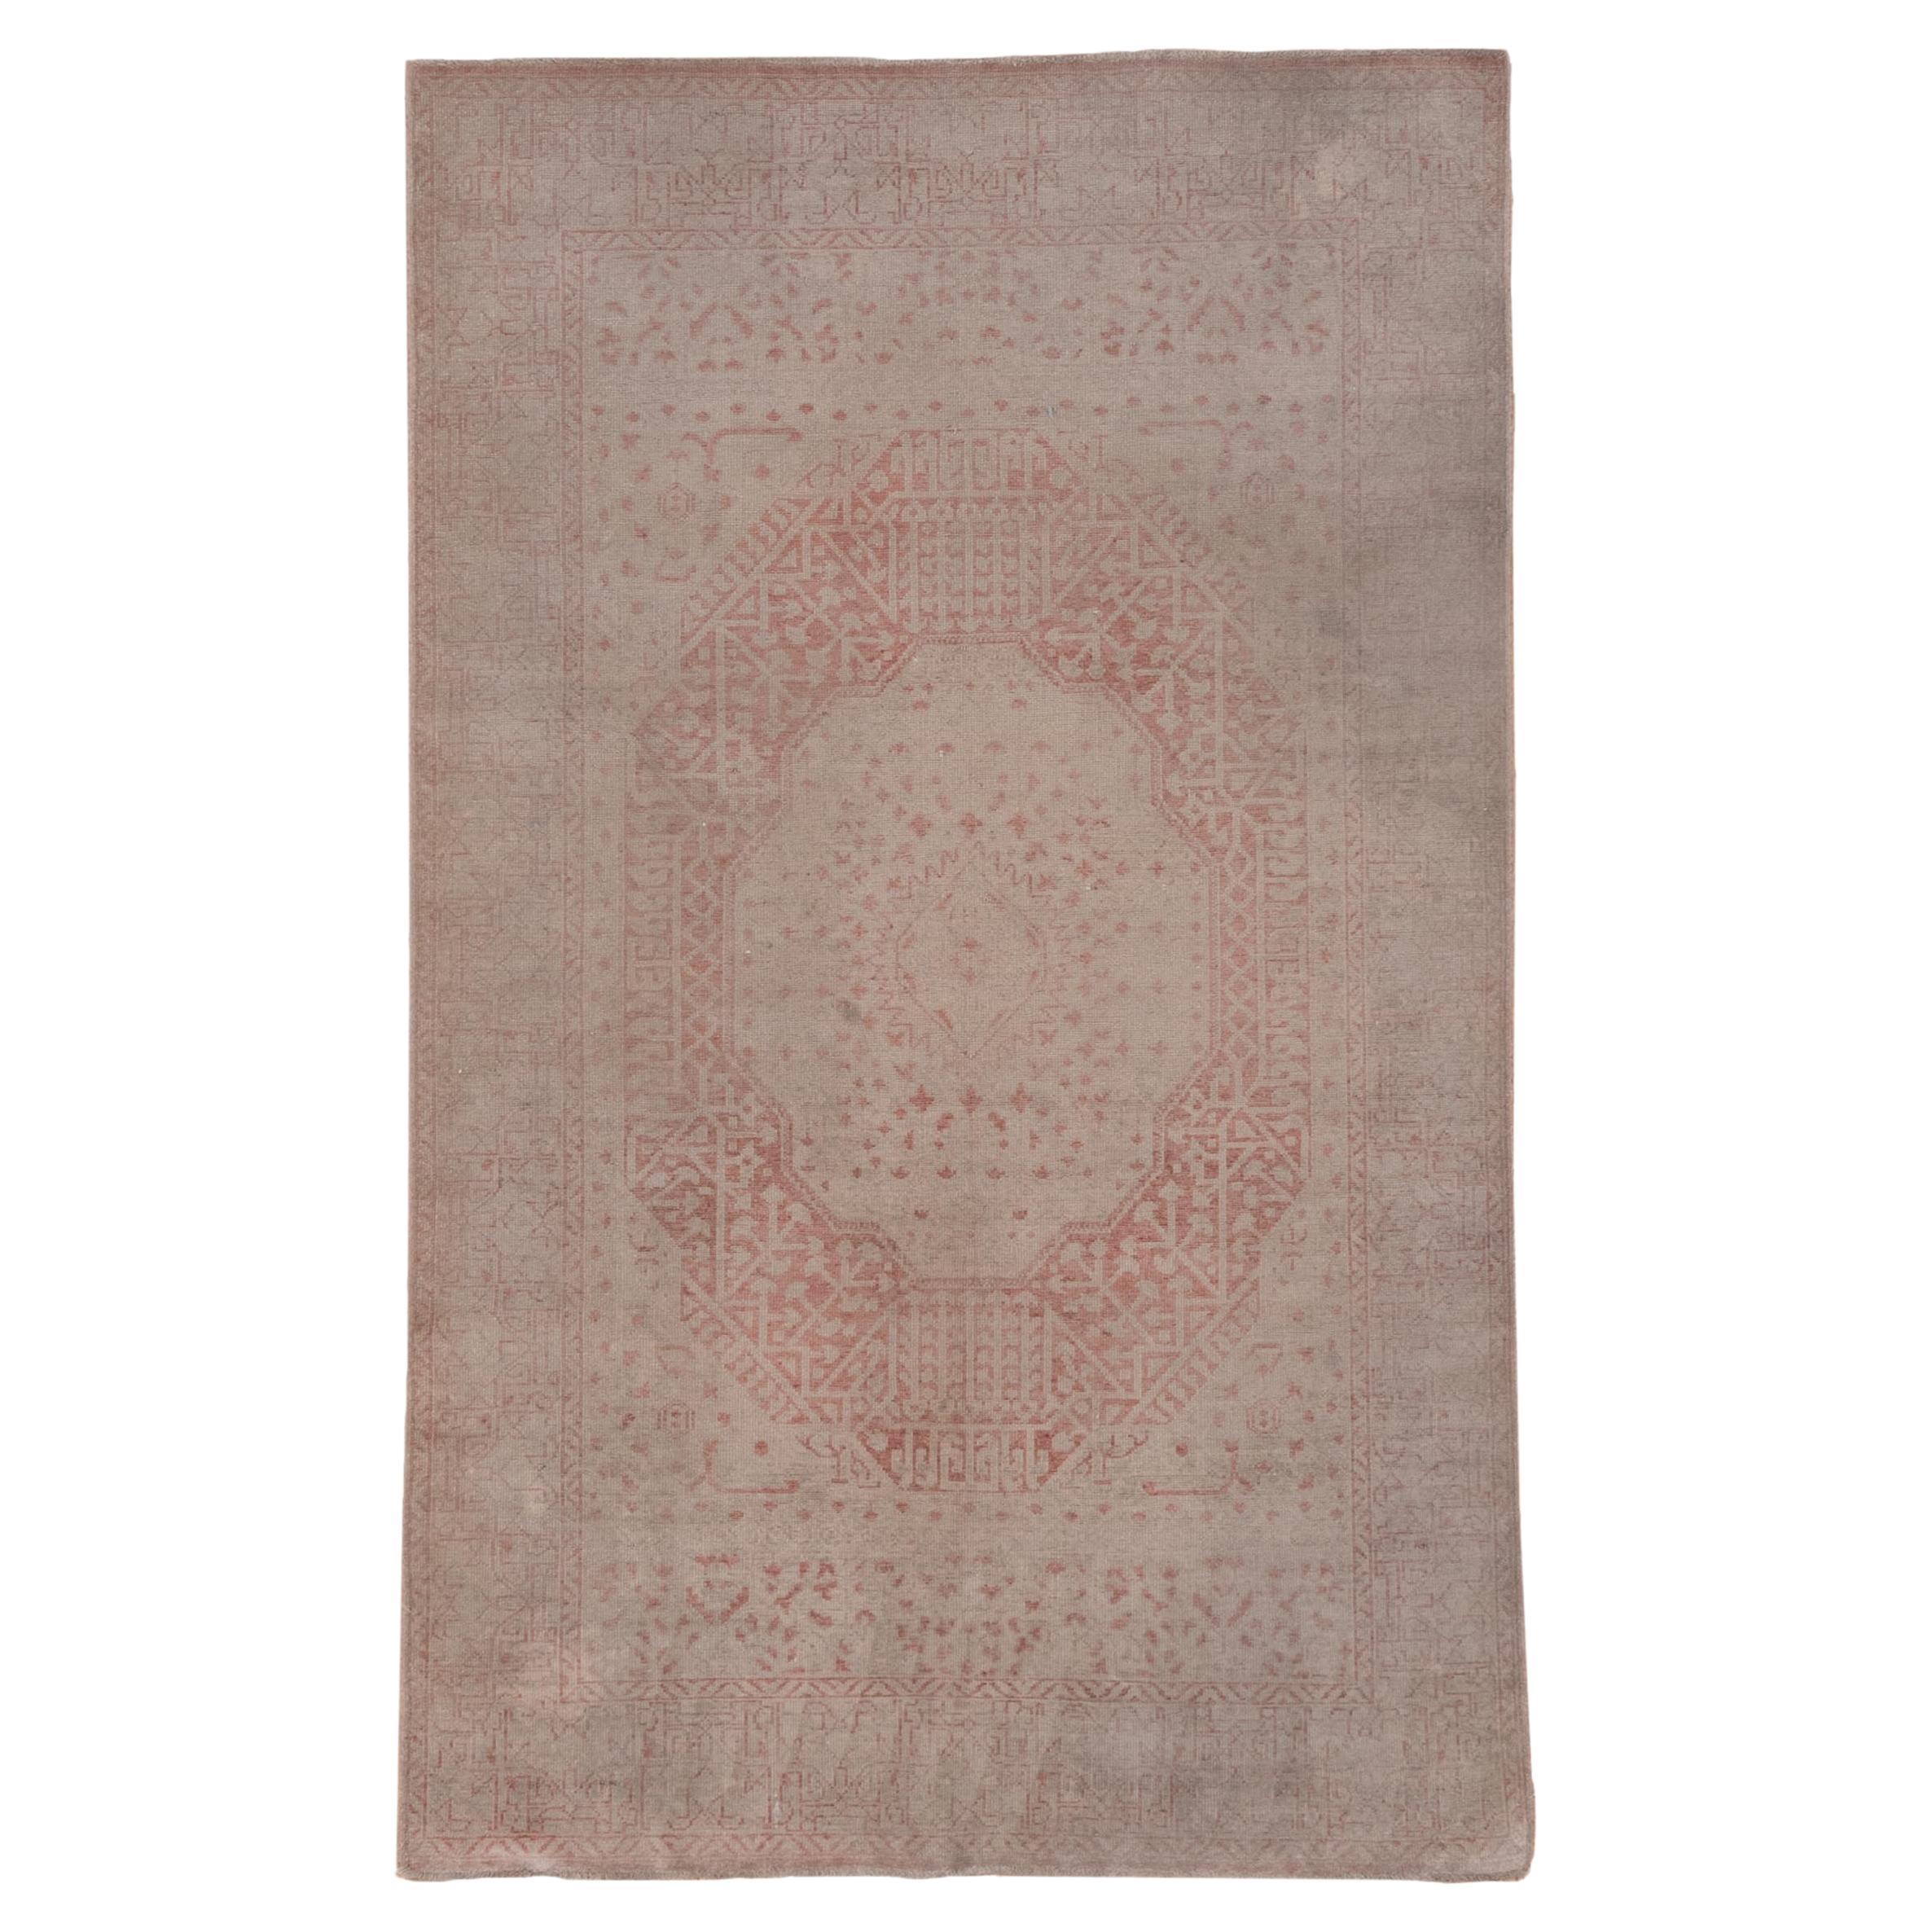 Sivas Antique Faded Central Medallion in Salmon Pinks and Soft Oranges